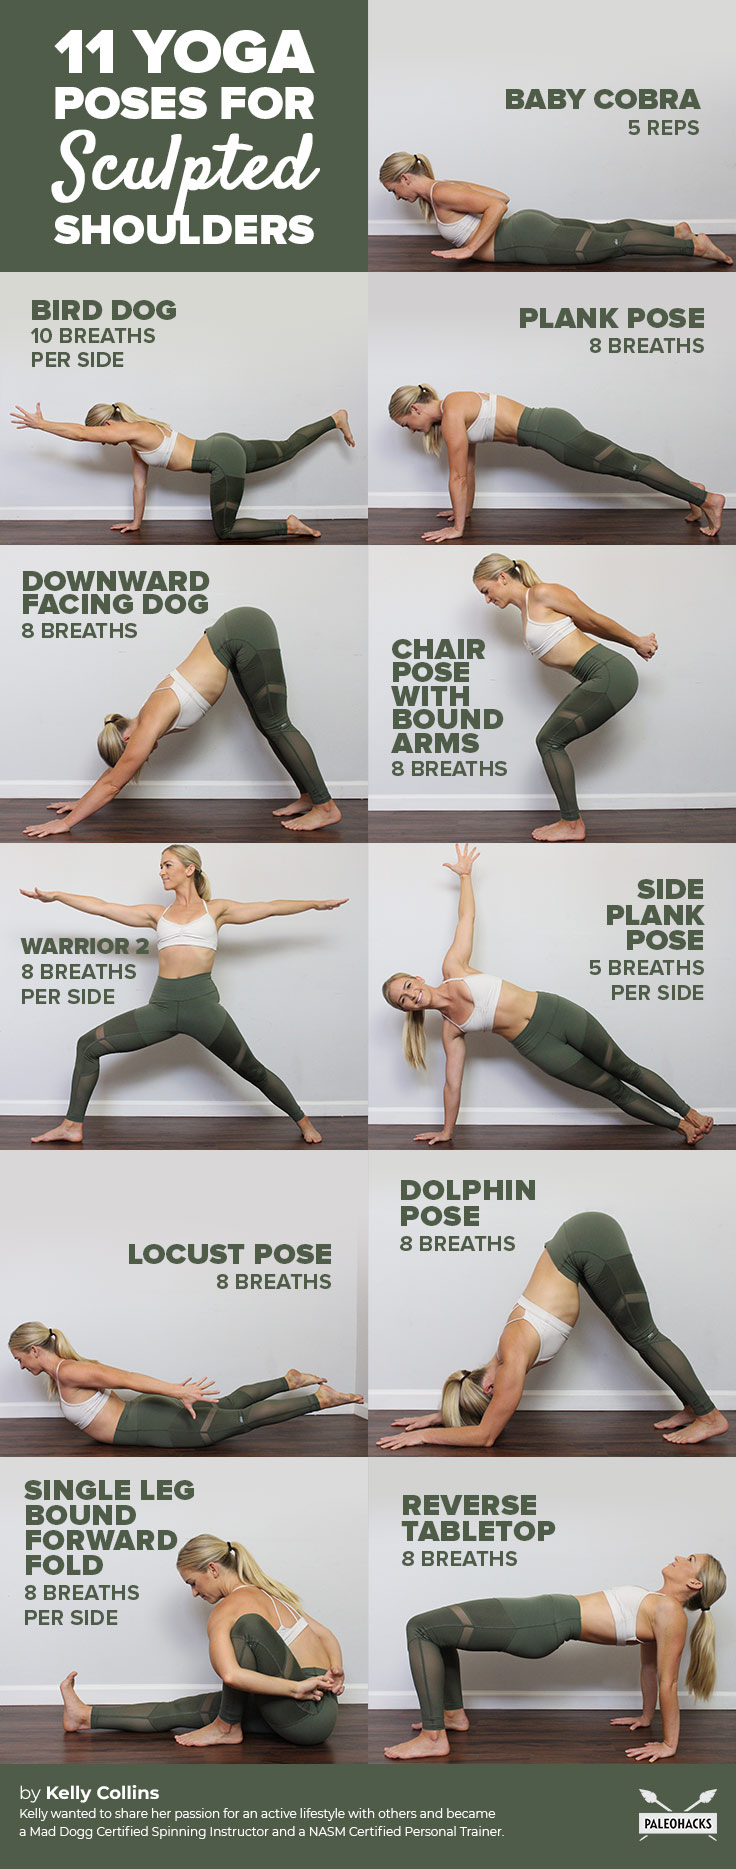 Use these 11 yoga poses two to three times per week to improve range of motion and mobility, while also toning up and sculpting those shoulders.